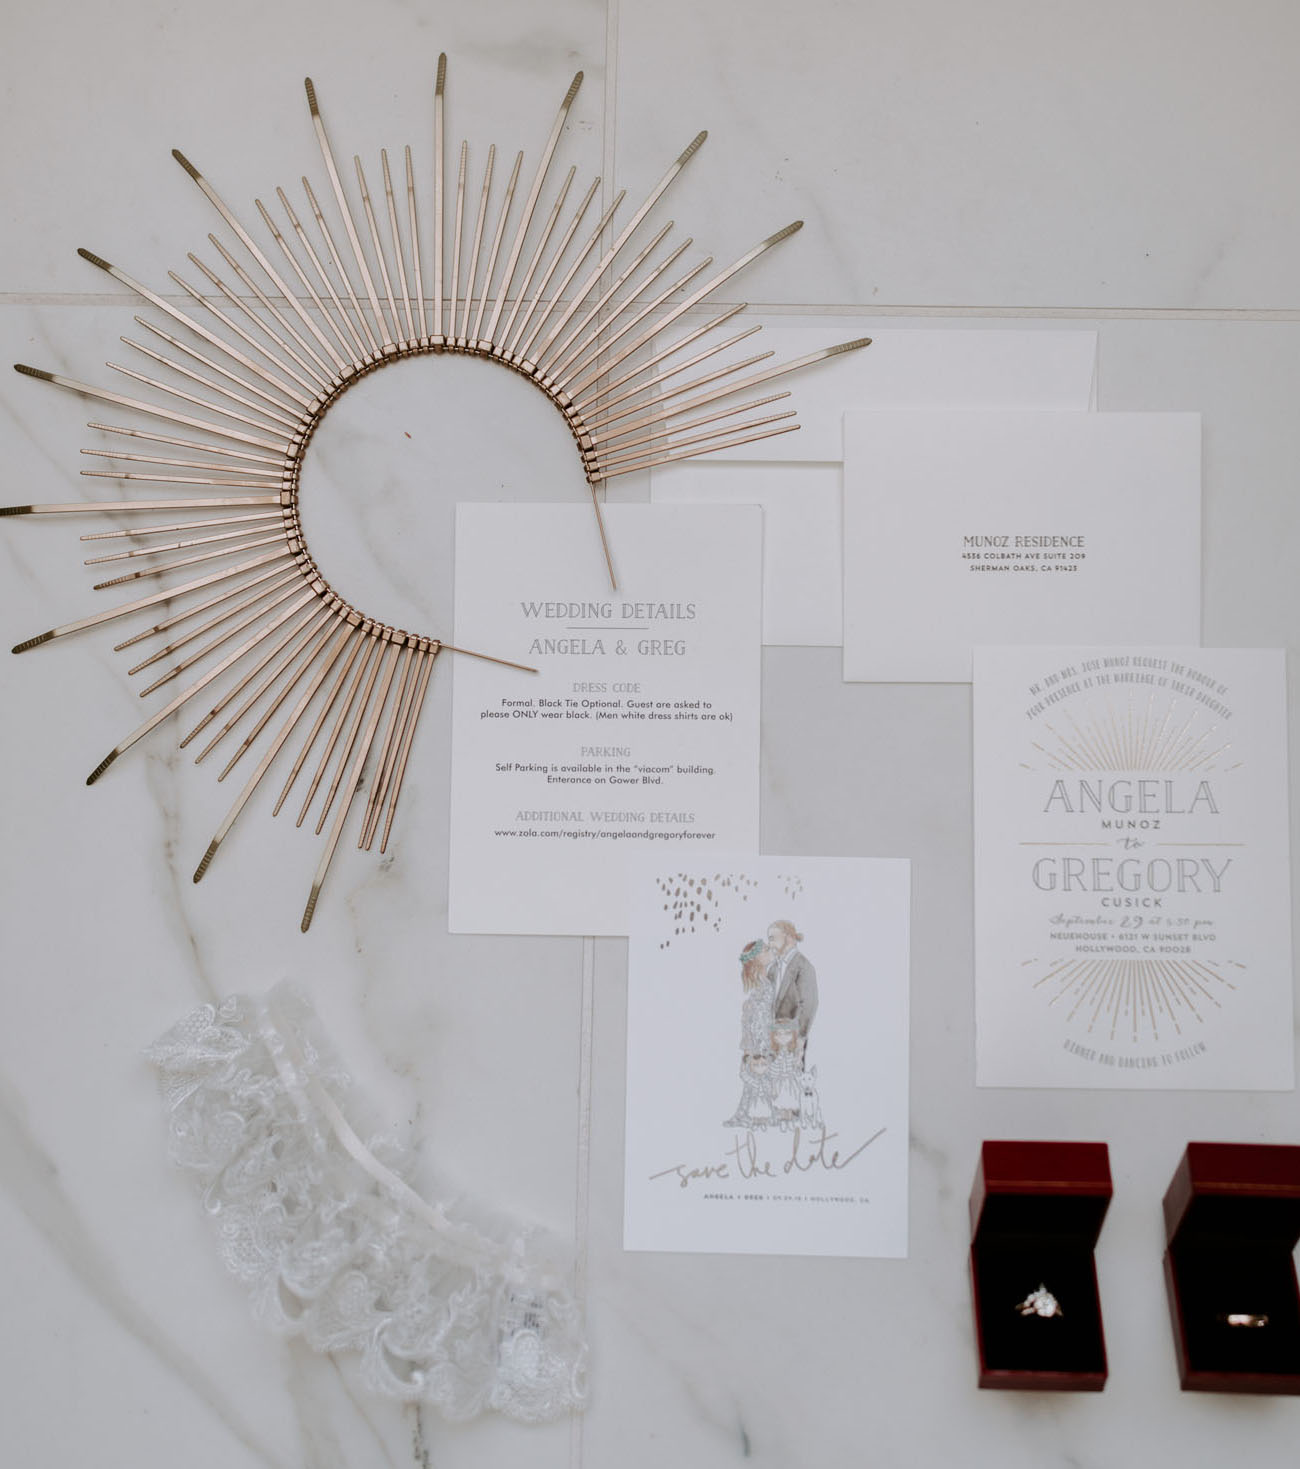 The wedding was spruced up with sunburst motifs   the headpiece, the backdrop and the stationery were done with them